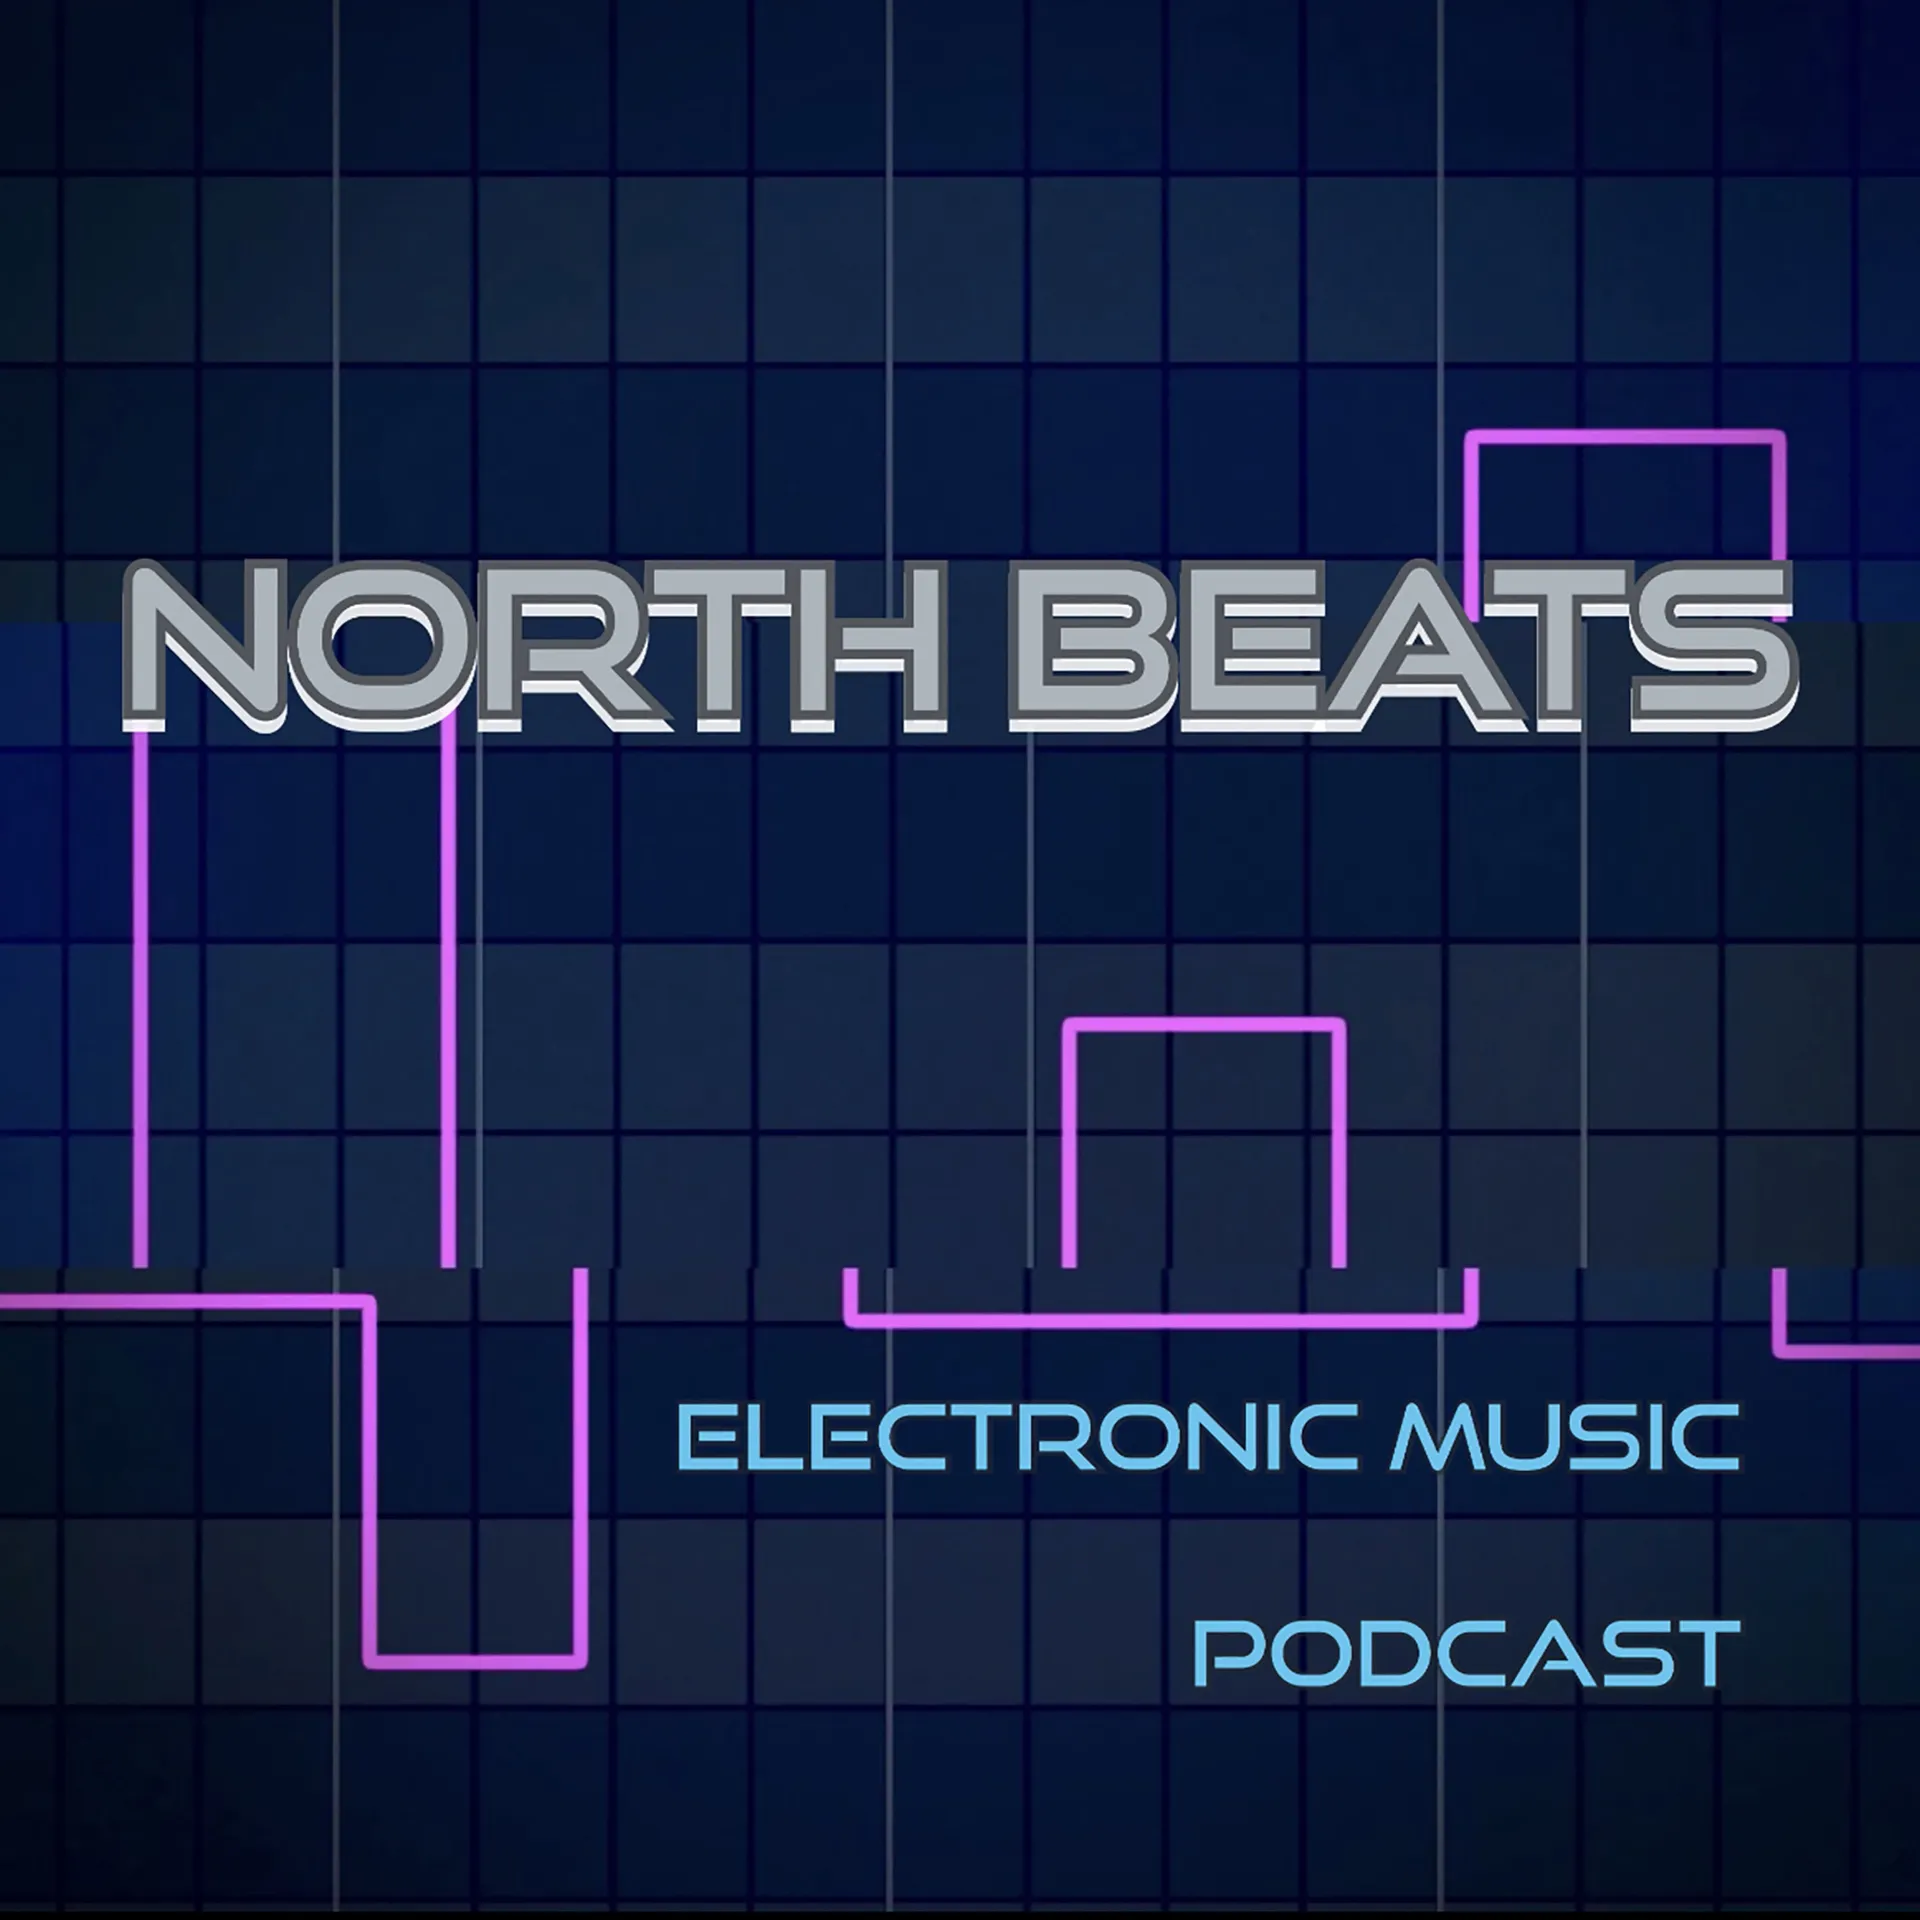 Lachlan Fletcher interview on North Beats podcast